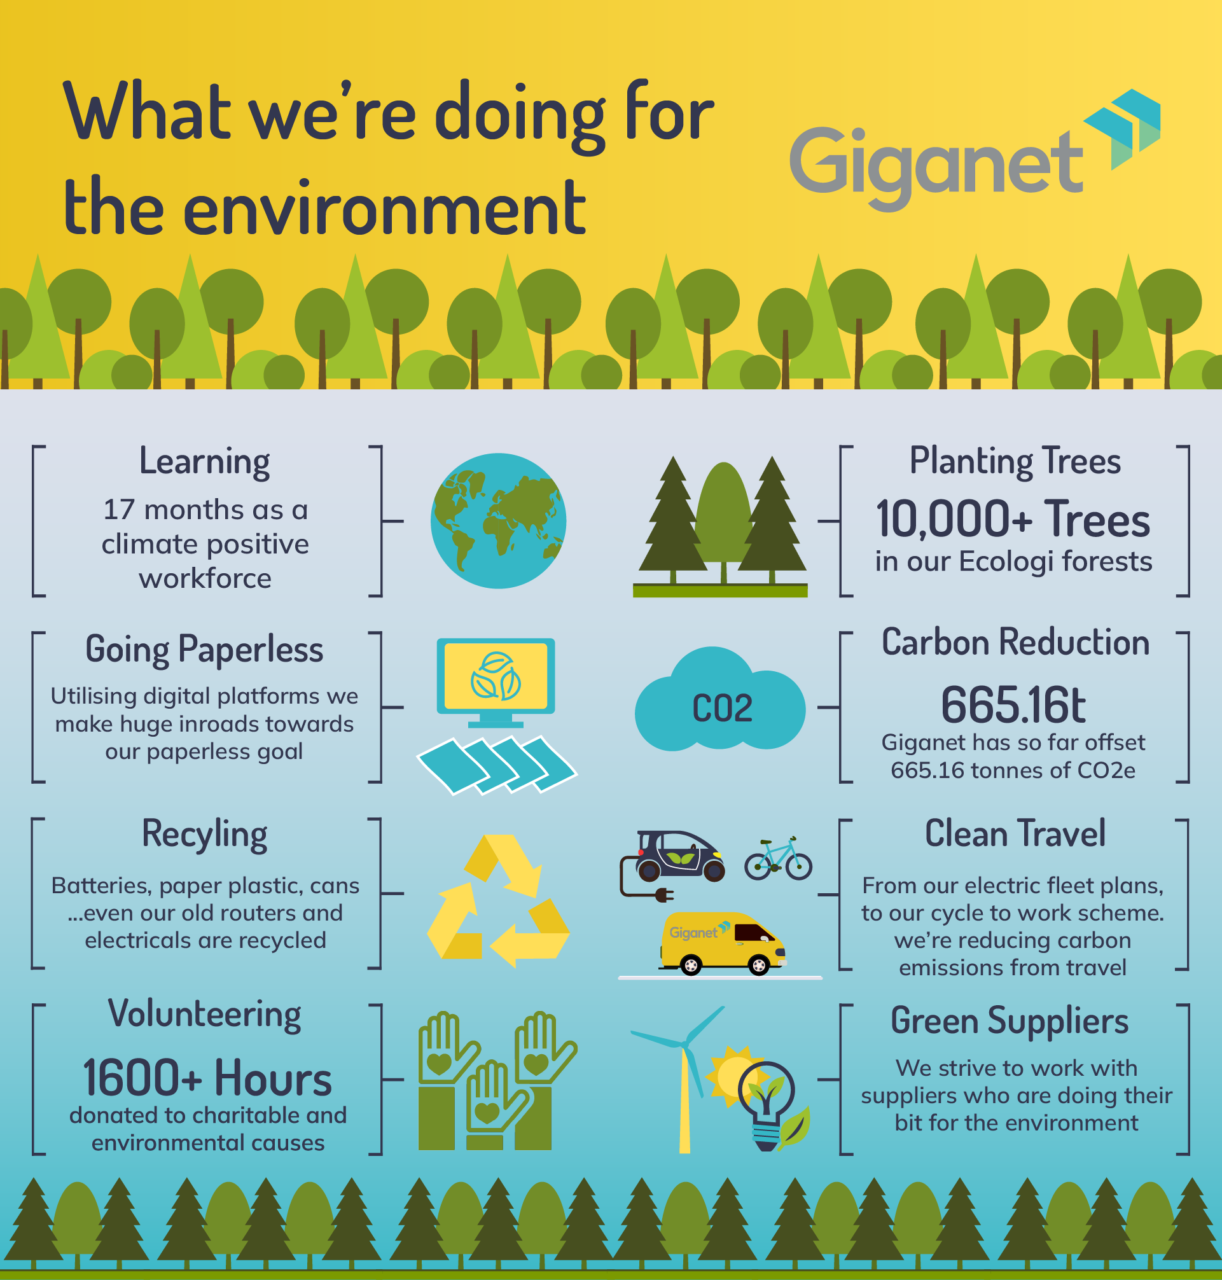 What Giganet is doing for the environment